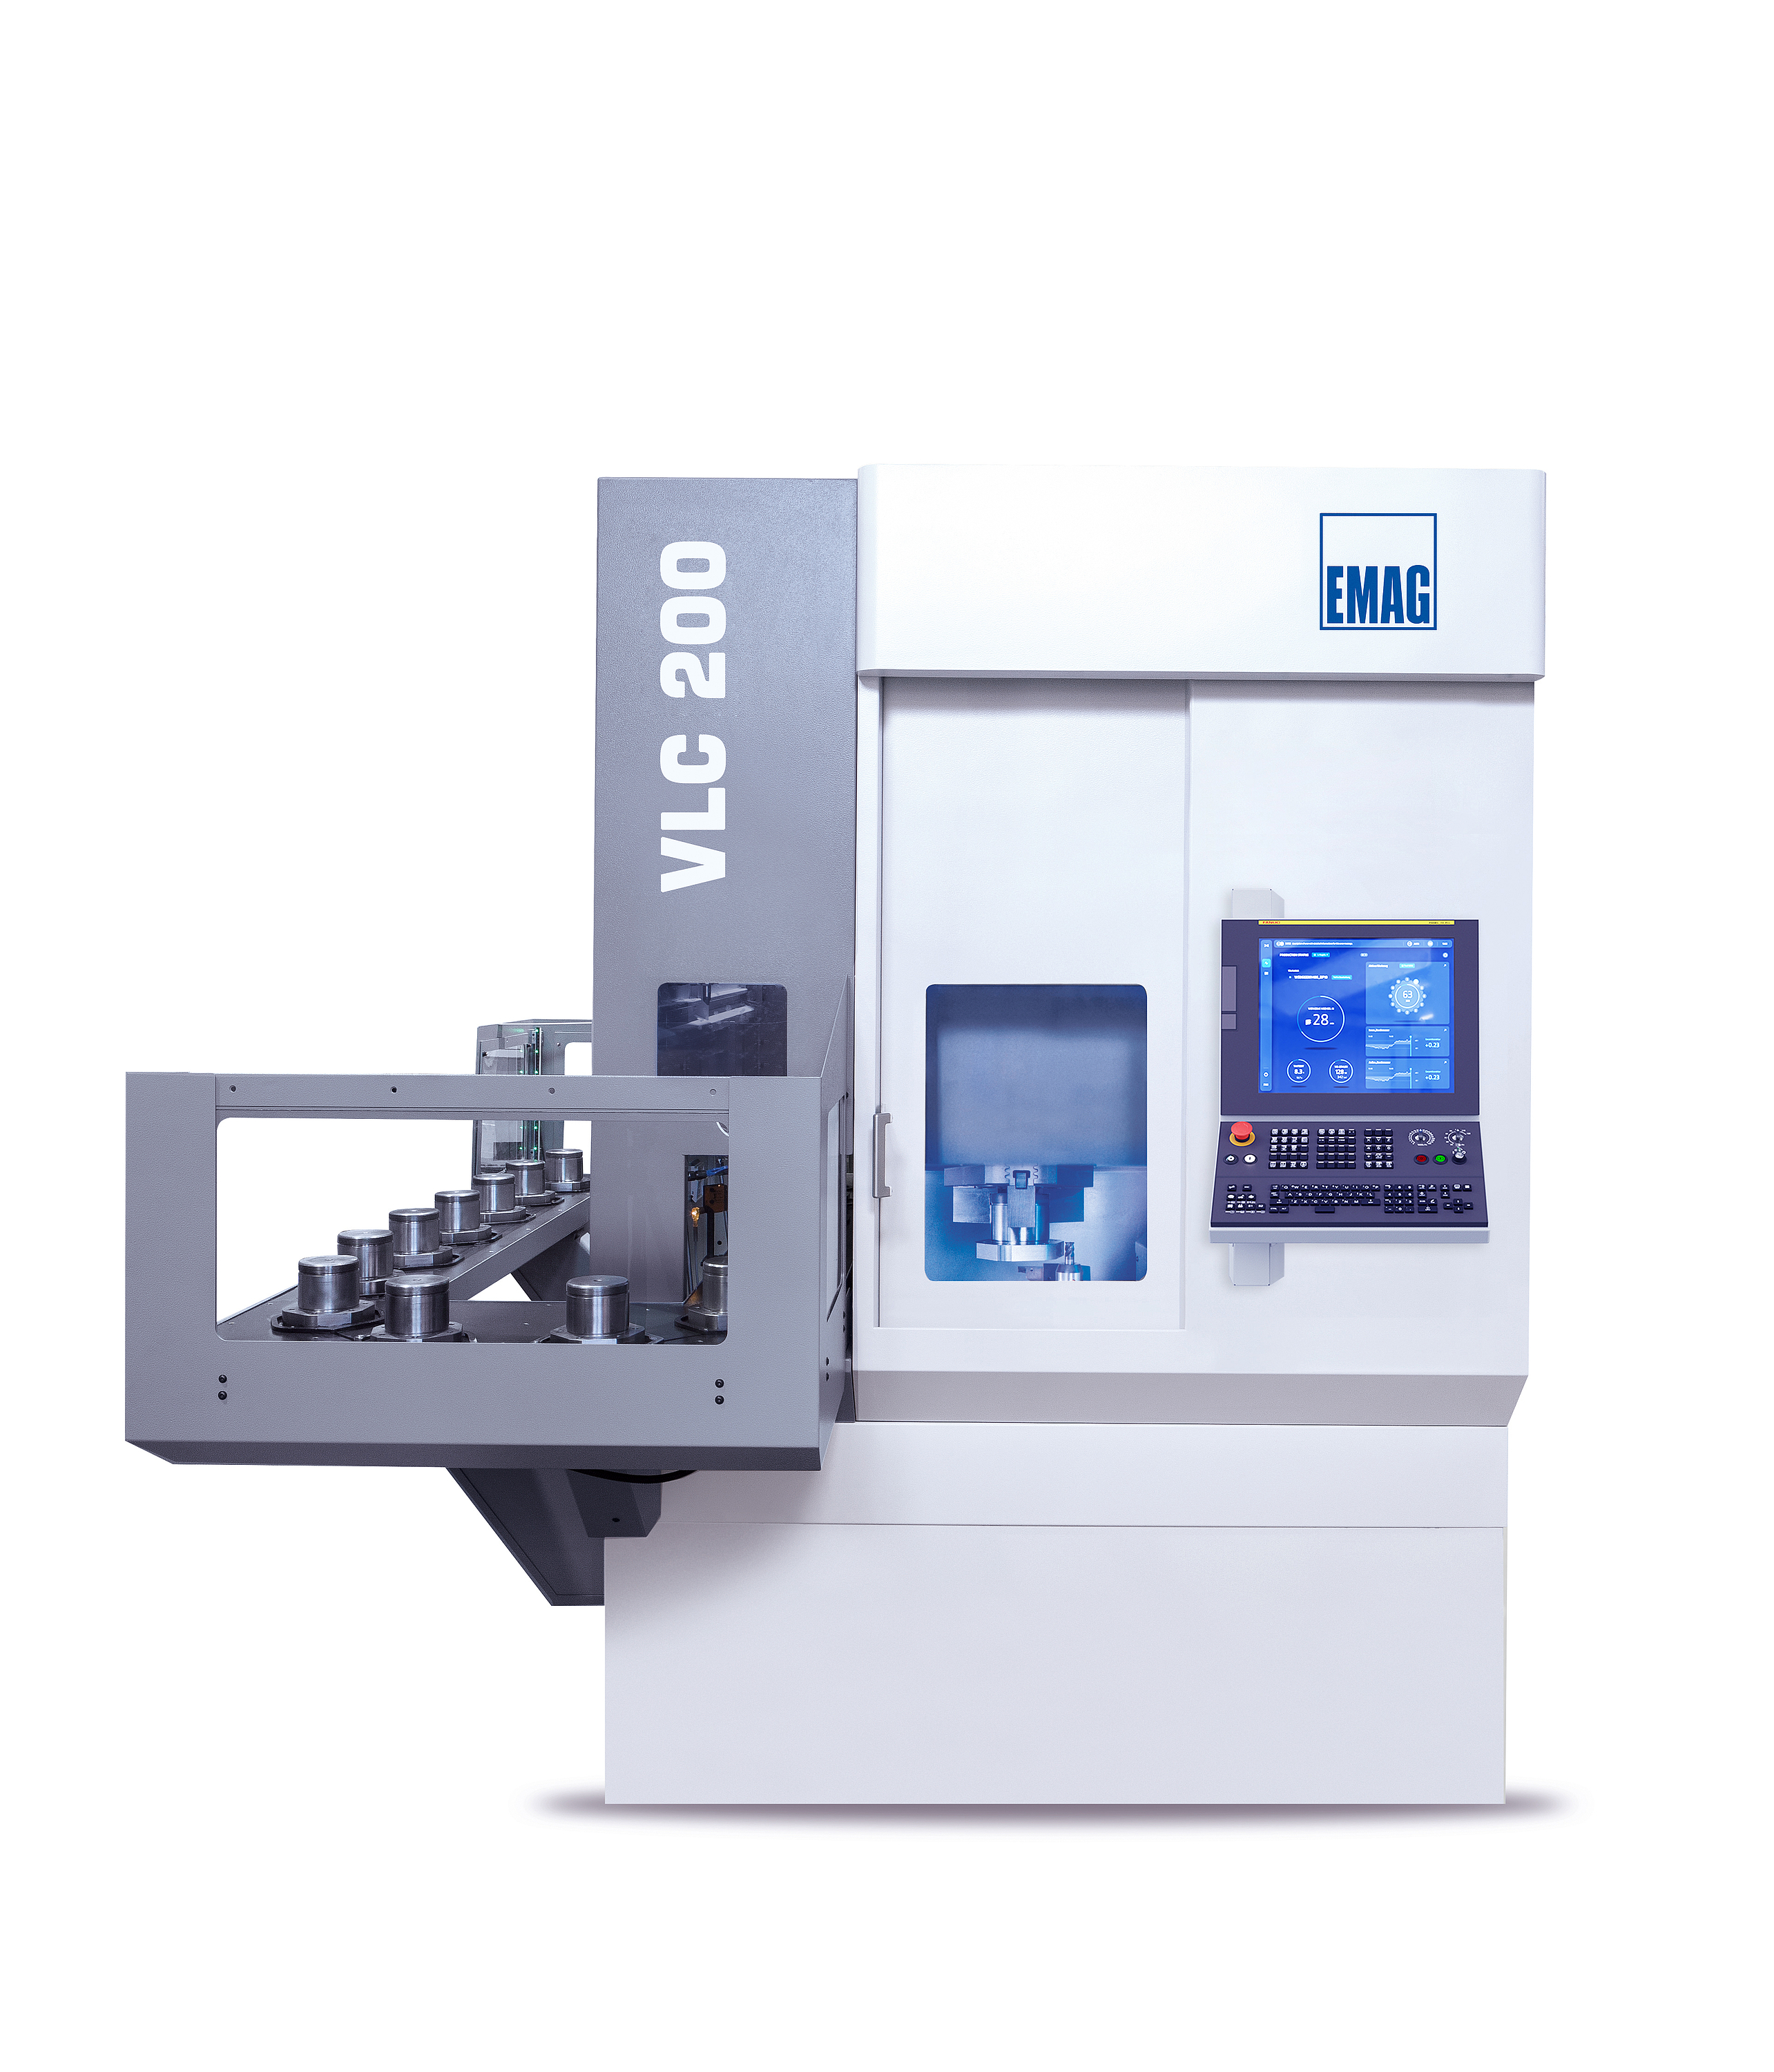 Custom manufacturing solutions based on VLC series CNC turning centers